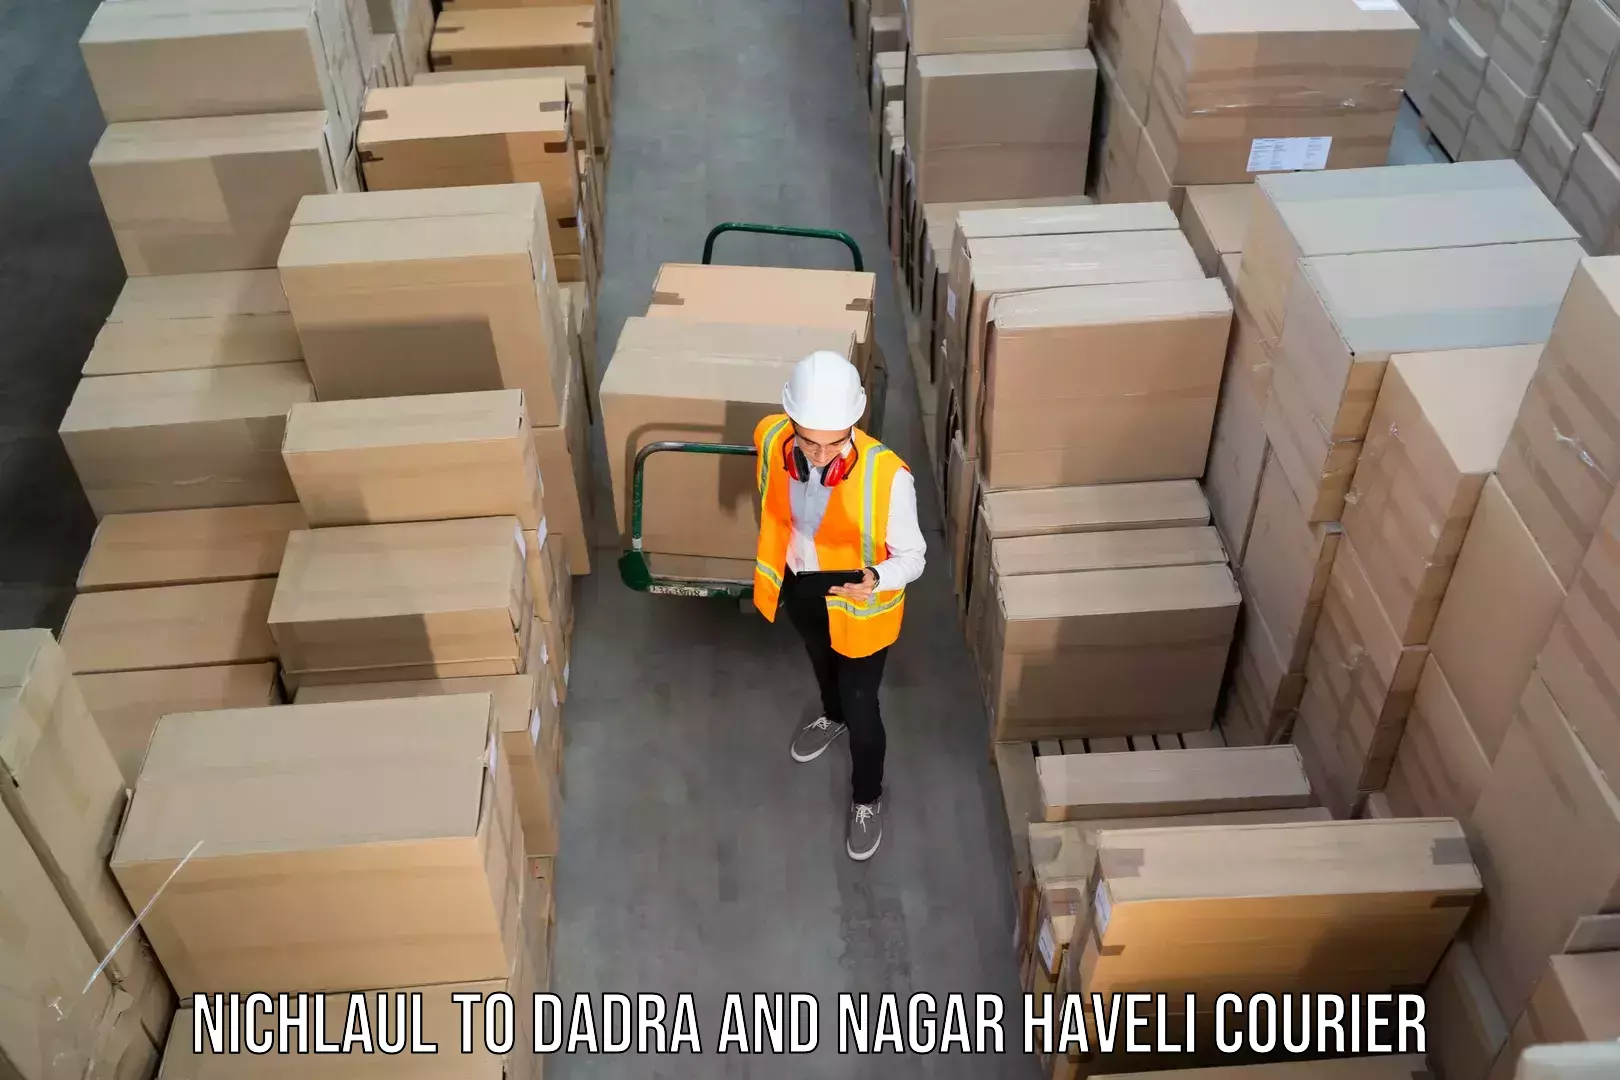 Next-day delivery options in Nichlaul to Dadra and Nagar Haveli